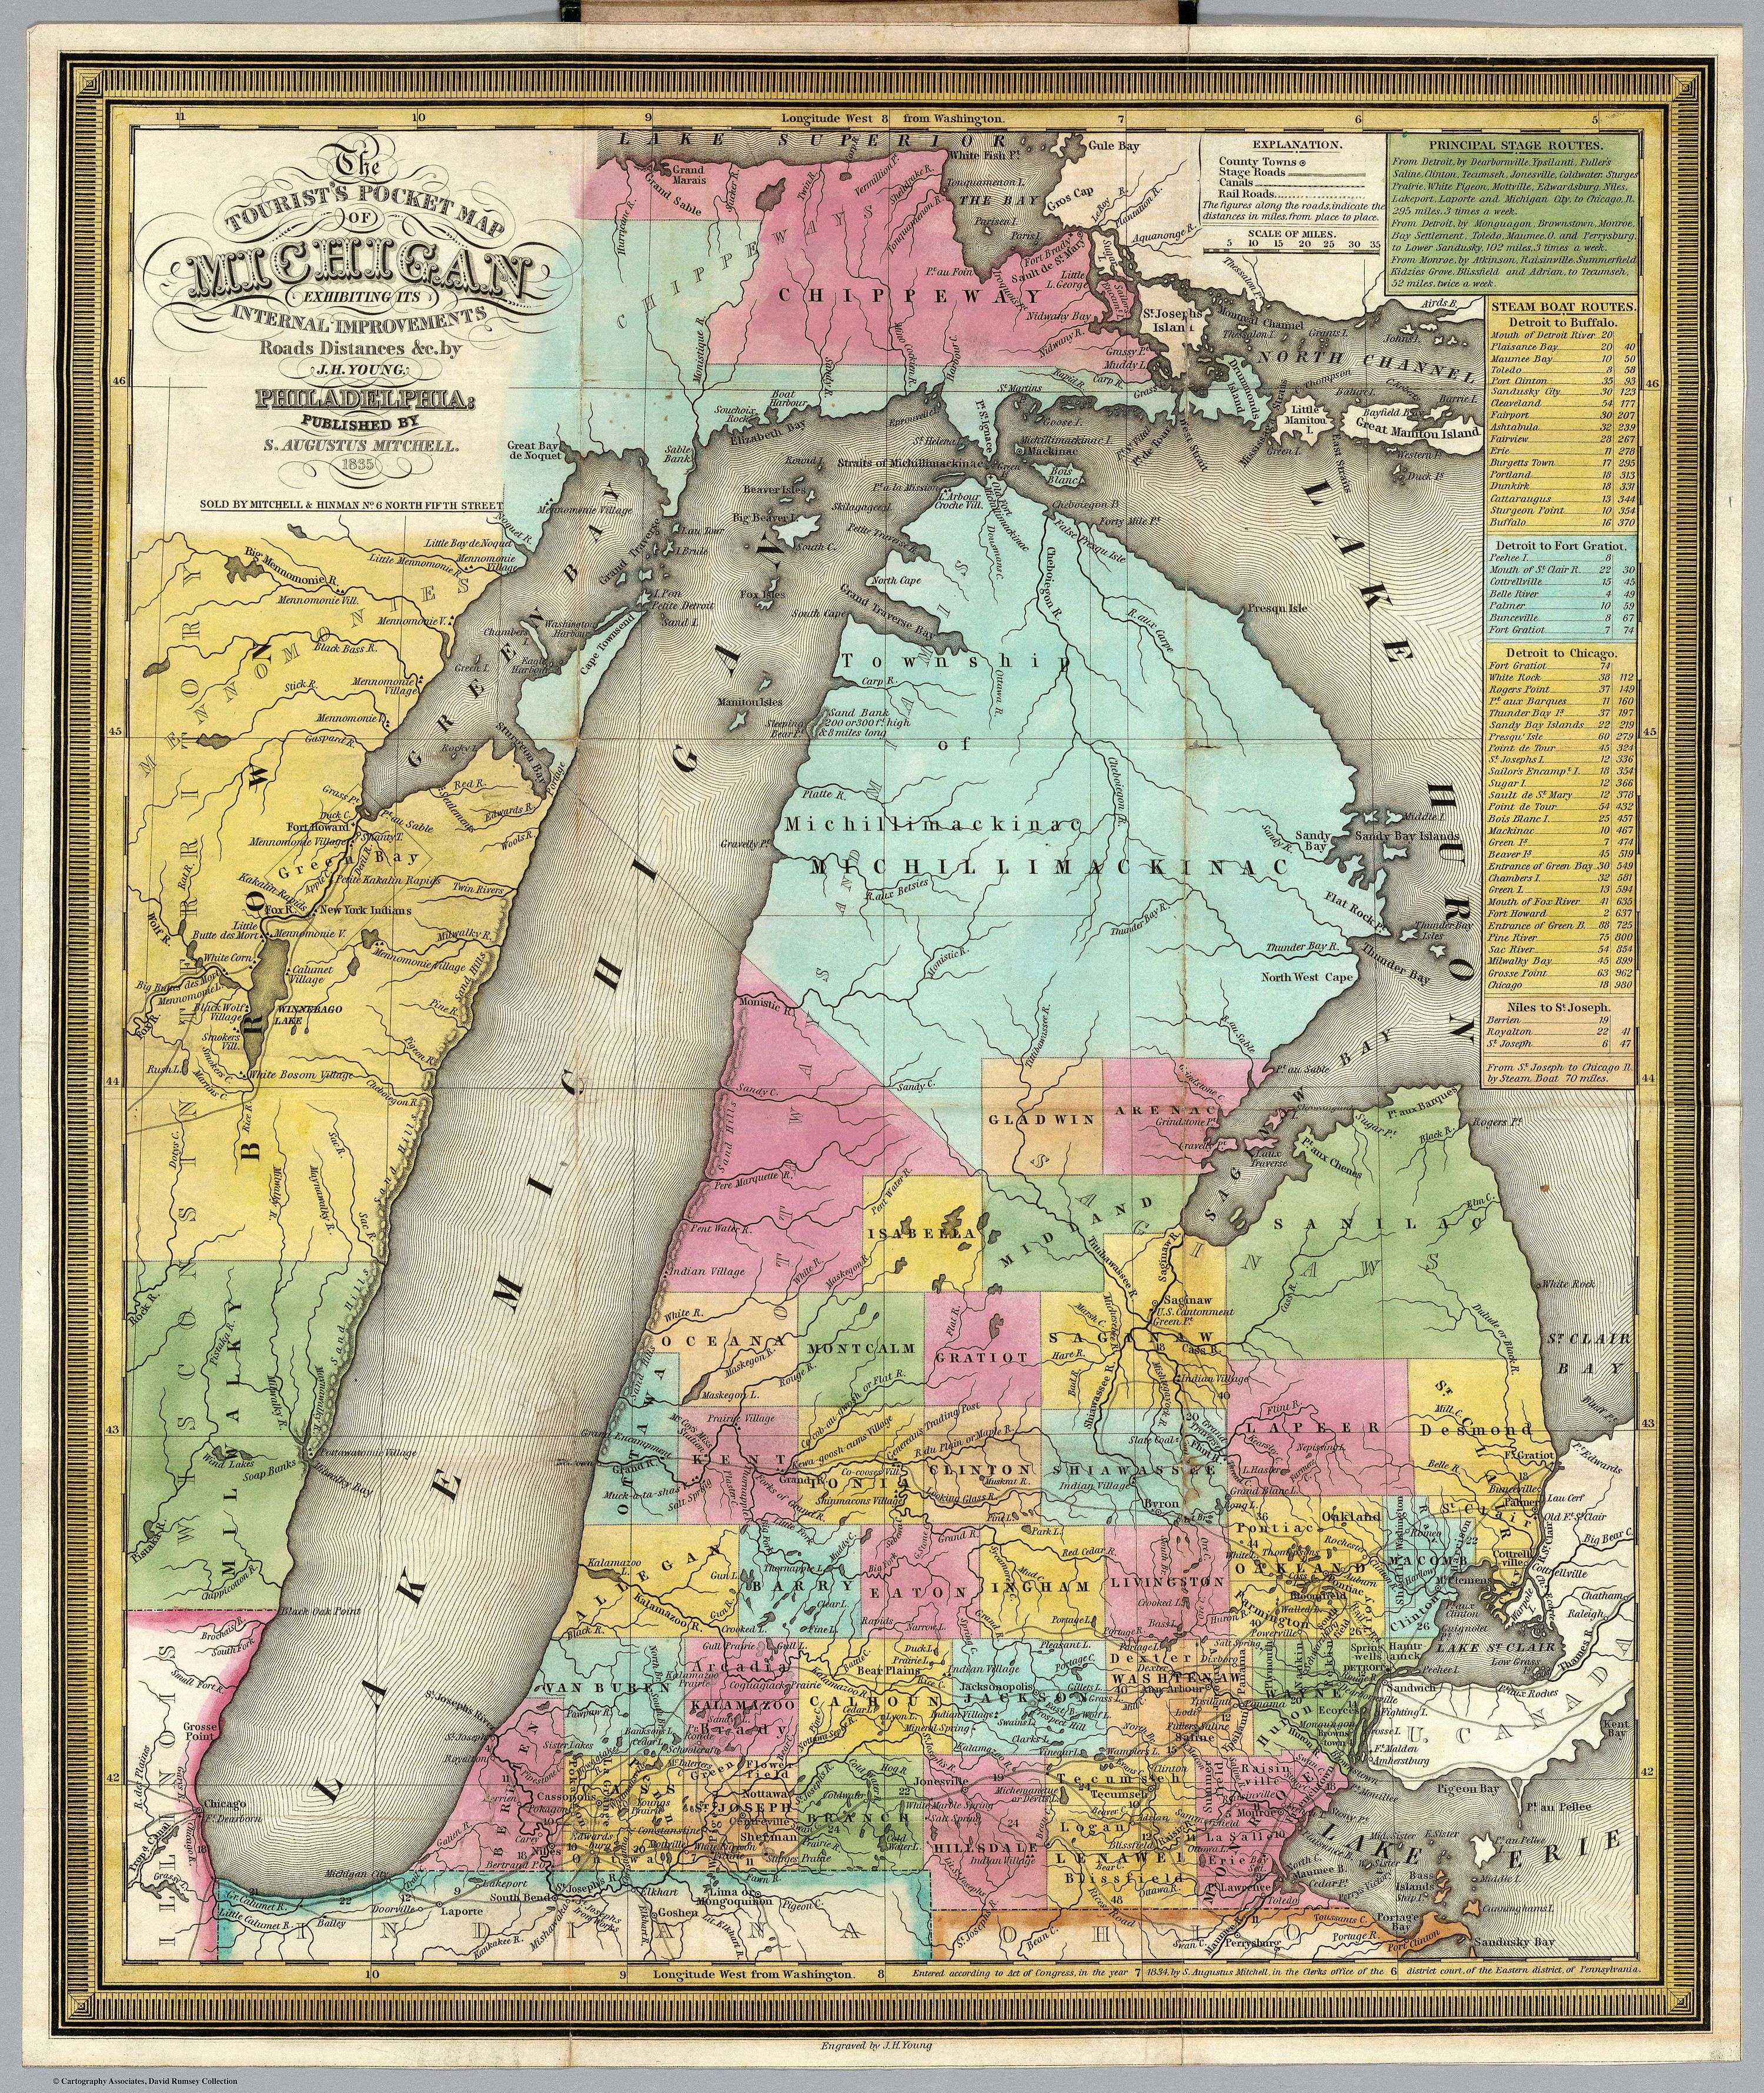 Lake Winnebago on the 1835 Tourist's Pocket Map of Michigan among the "Mennomonie" villages of Wisconsin Territory. Present day Fond du Lac is labeled "White Bosom Village".